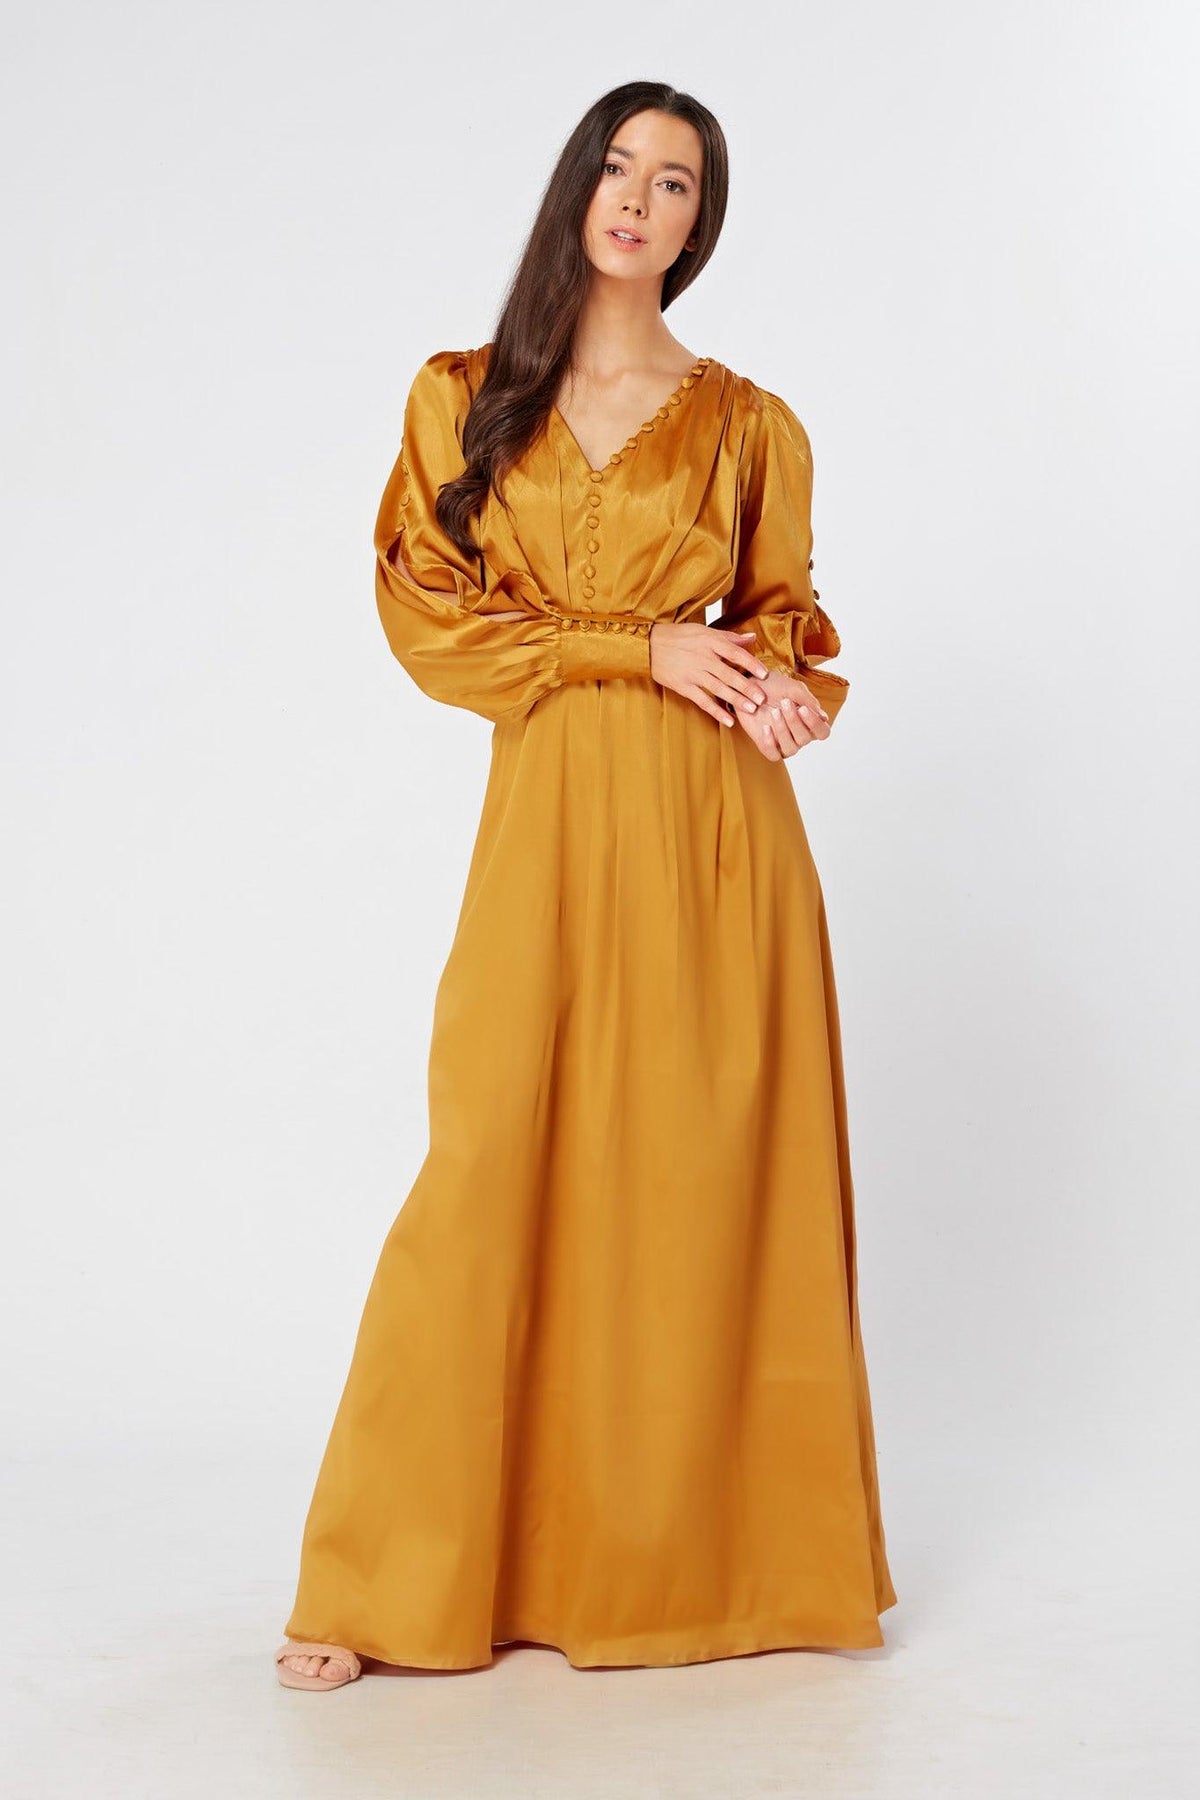 Goldyna Warm Gold Satin Maxi Dress With Buttoned Design Long Sleeves - TAHLIRA